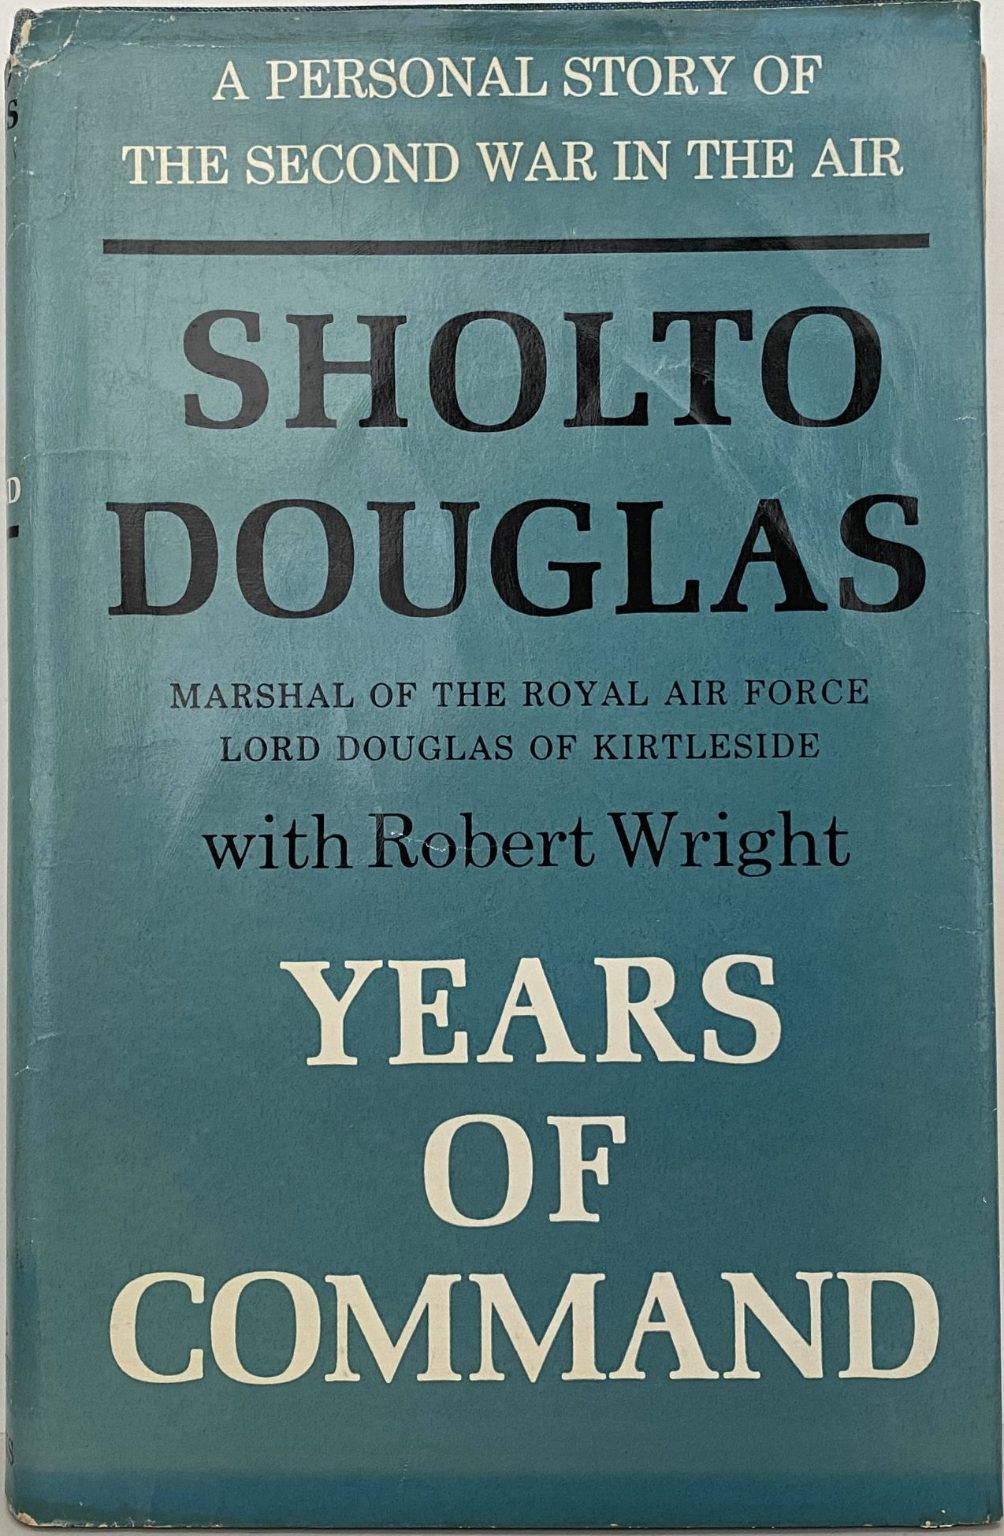 YEARS OF COMMAND: Autobiography Sholto Douglas